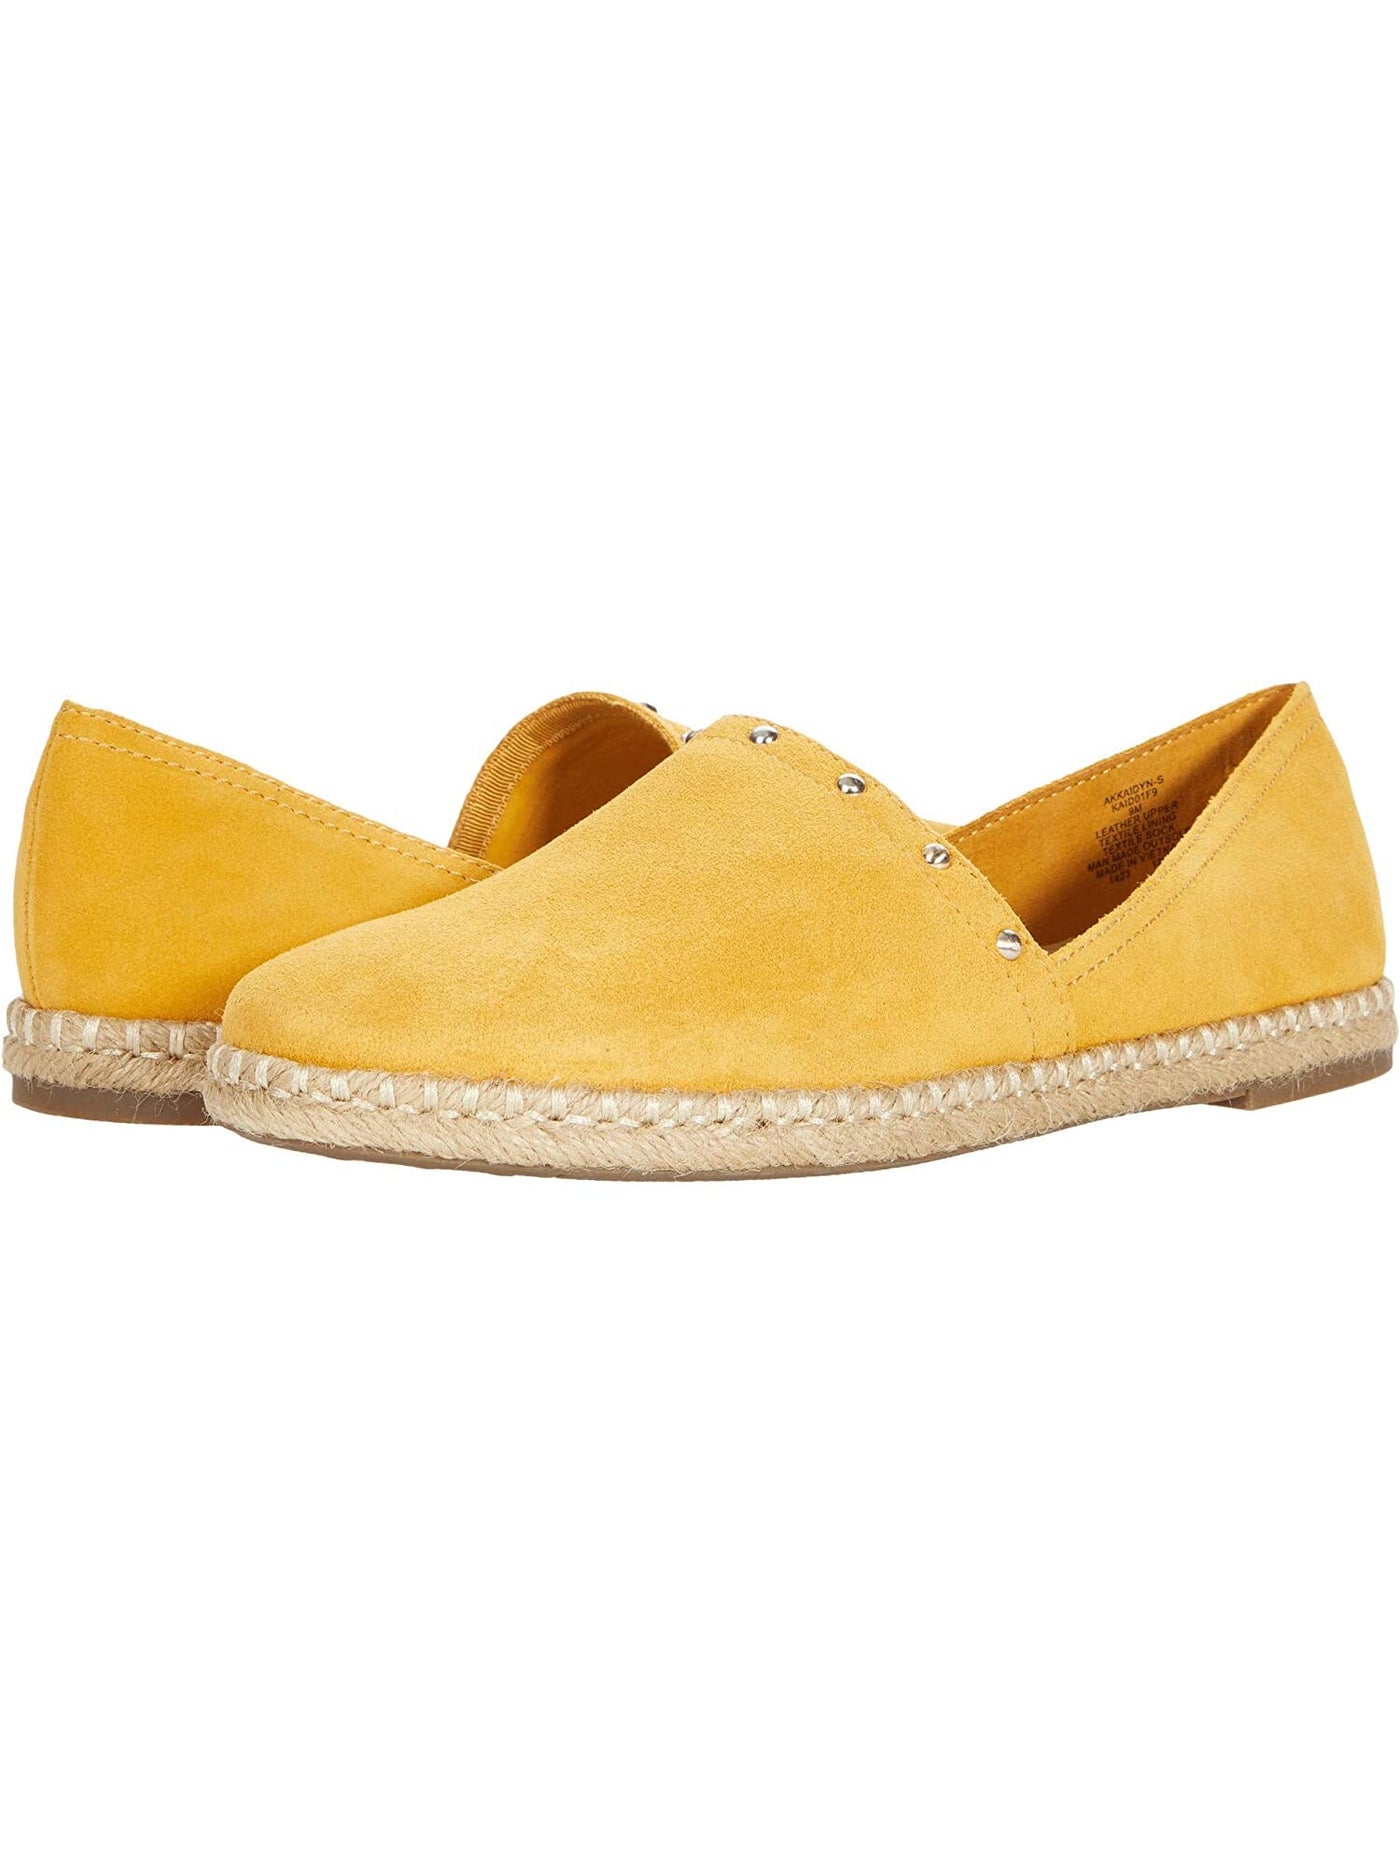 ANNE KLEIN Womens Yellow Jute Wrapped Studded Breathable Kaily Round Toe Slip On Leather Espadrille Shoes 9.5 M